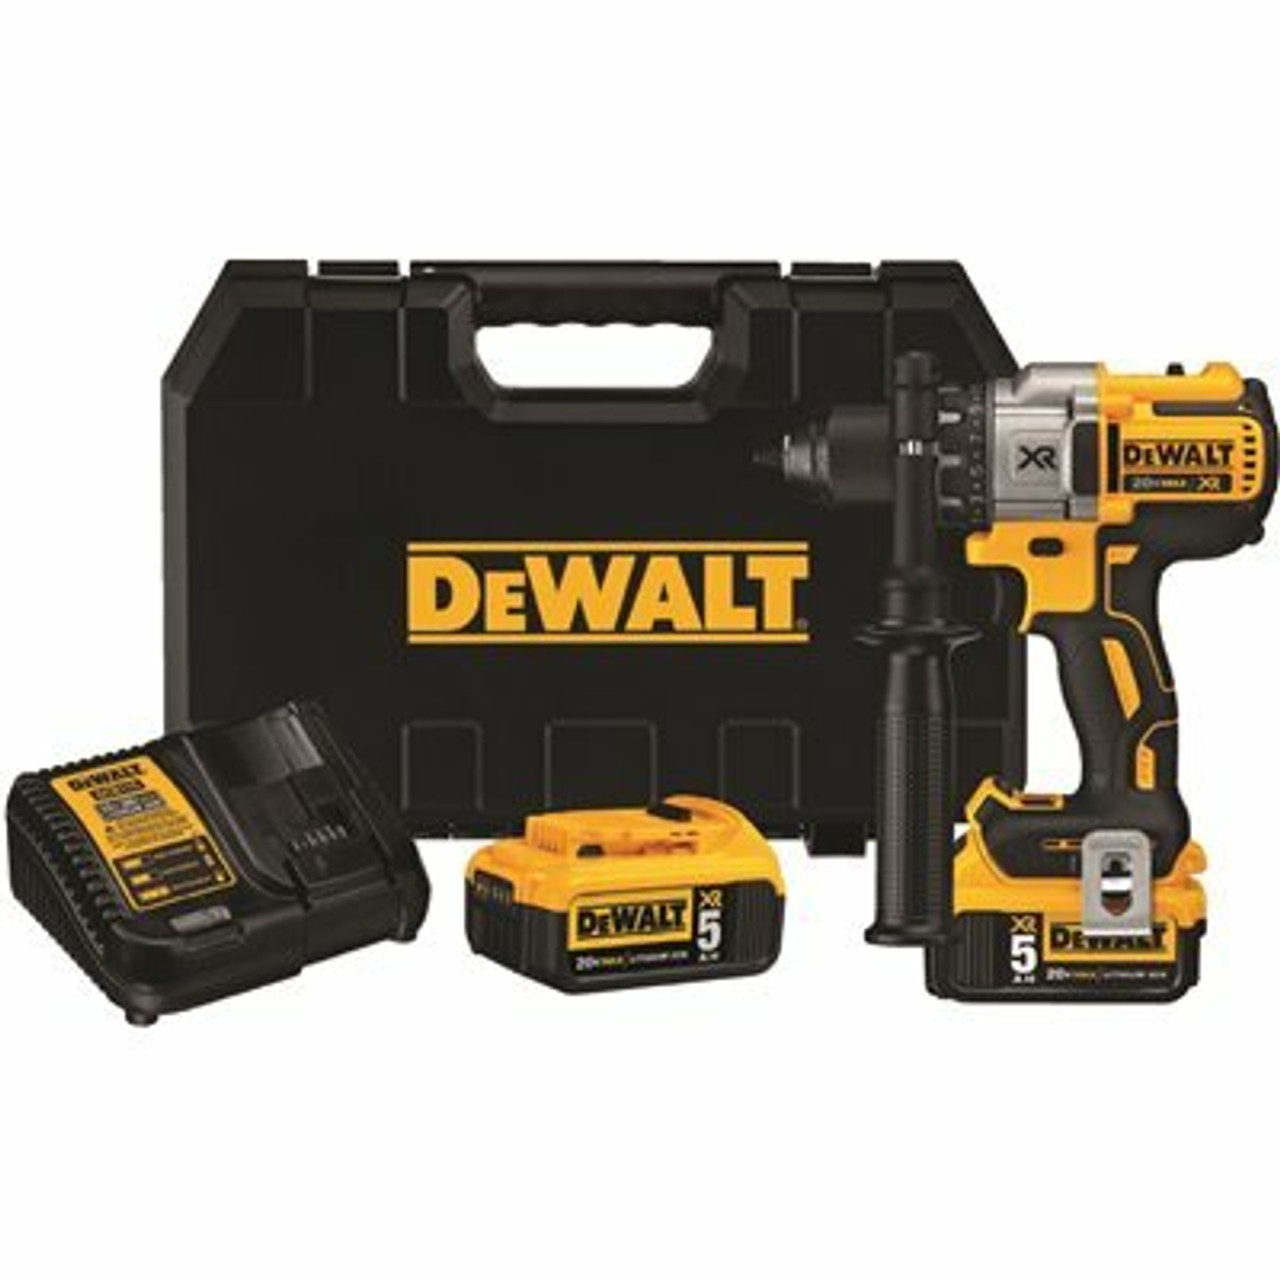 Dewalt 20-Volt Max Xr Cordless Brushless 3-Speed 1/2 In. Drill/Driver With (2) 20-Volt 5.0Ah Batteries & Charger